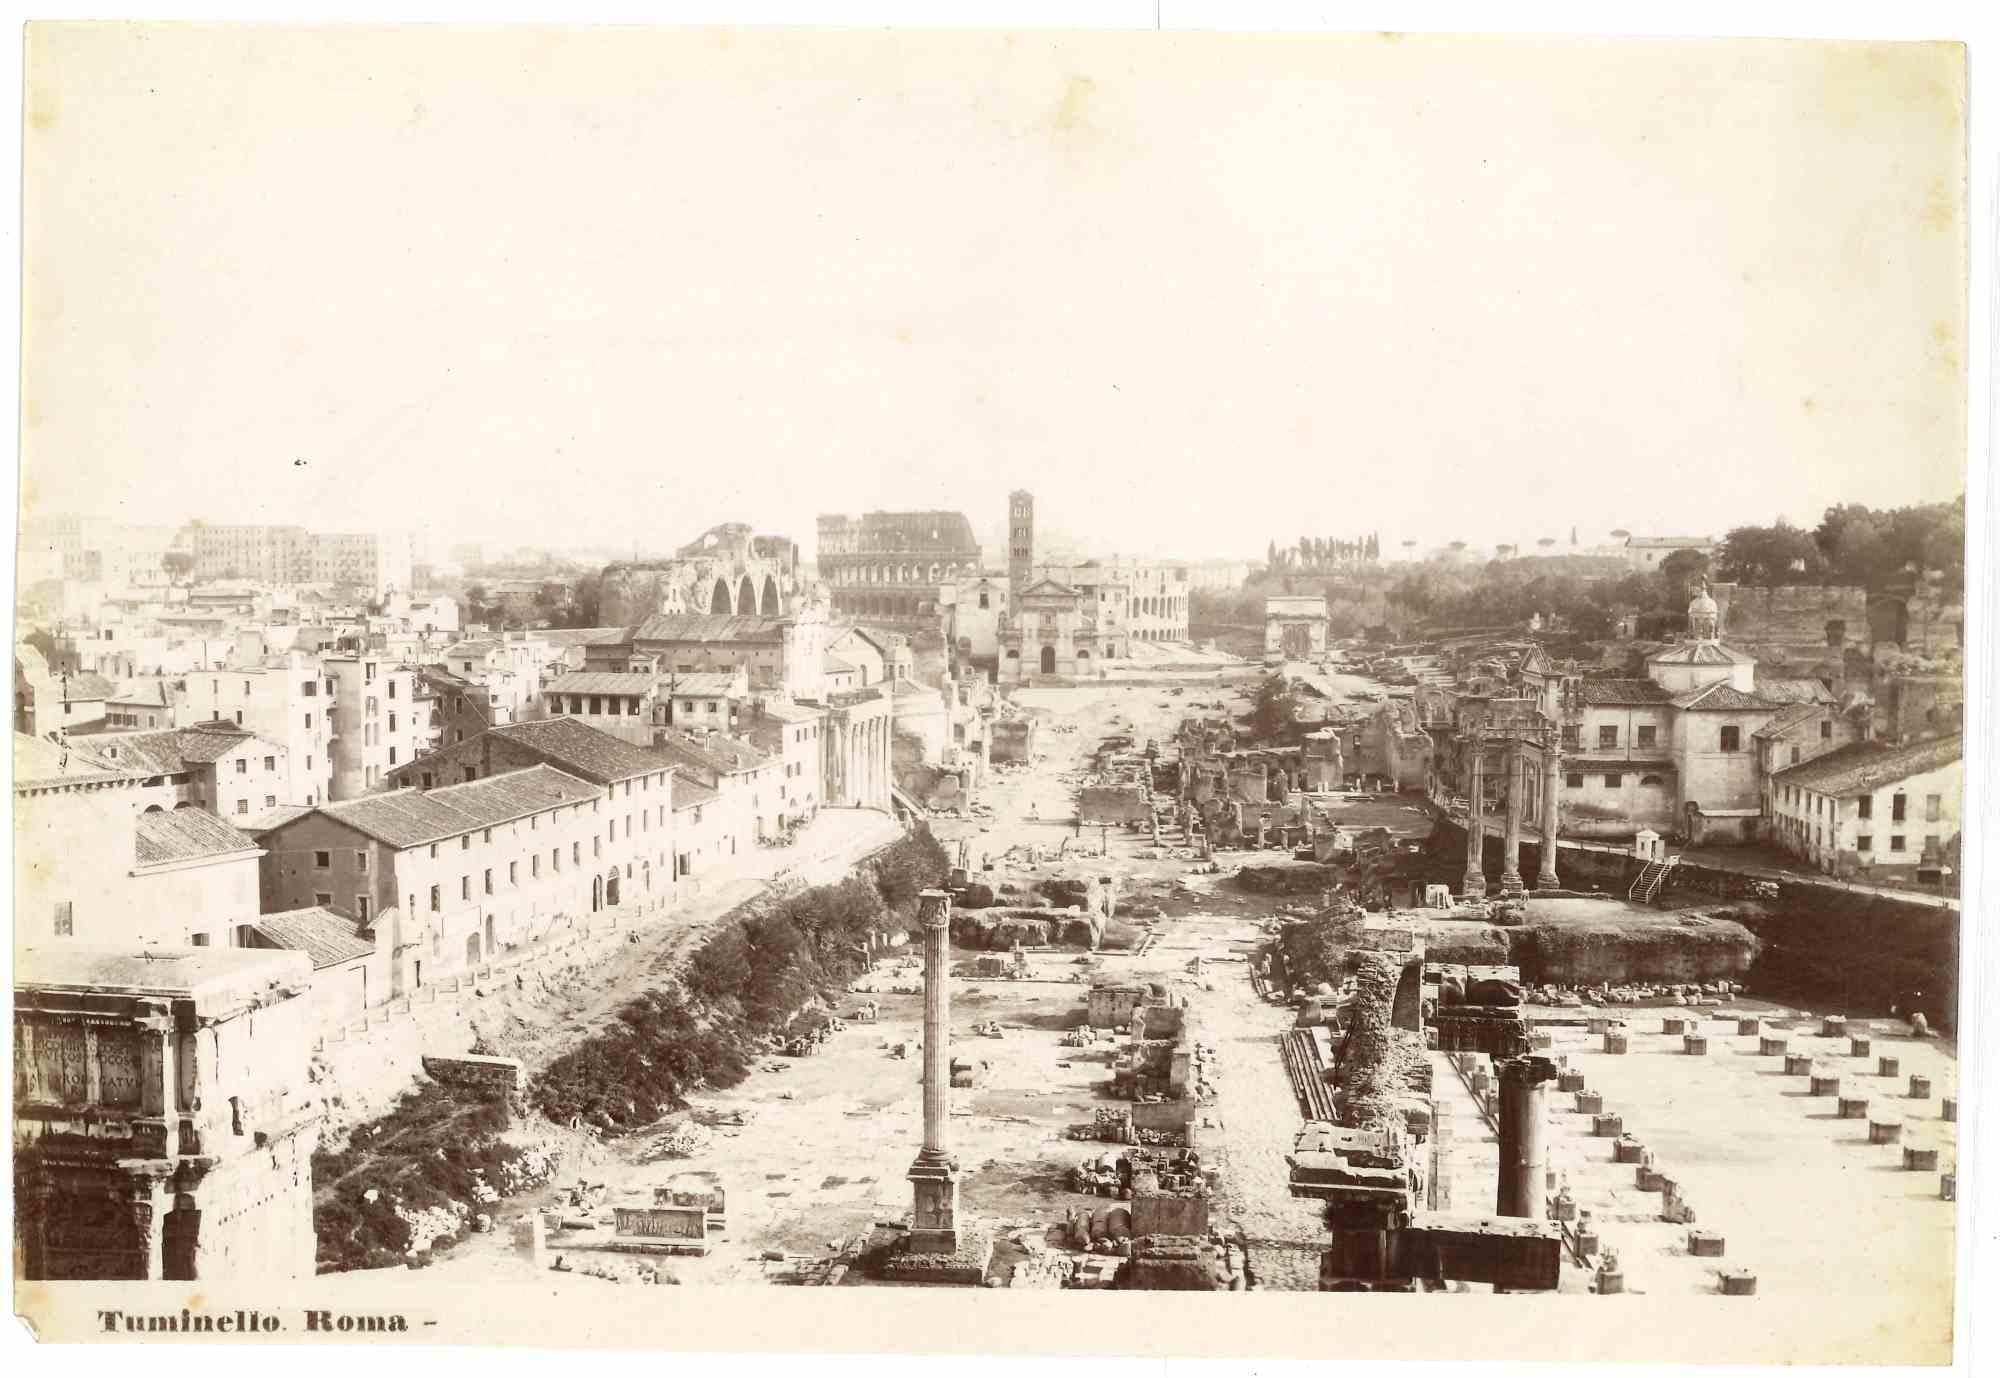 Roman Imperial Forums - Vintage Photo by Ludovico Tuminello - Early 20th Century